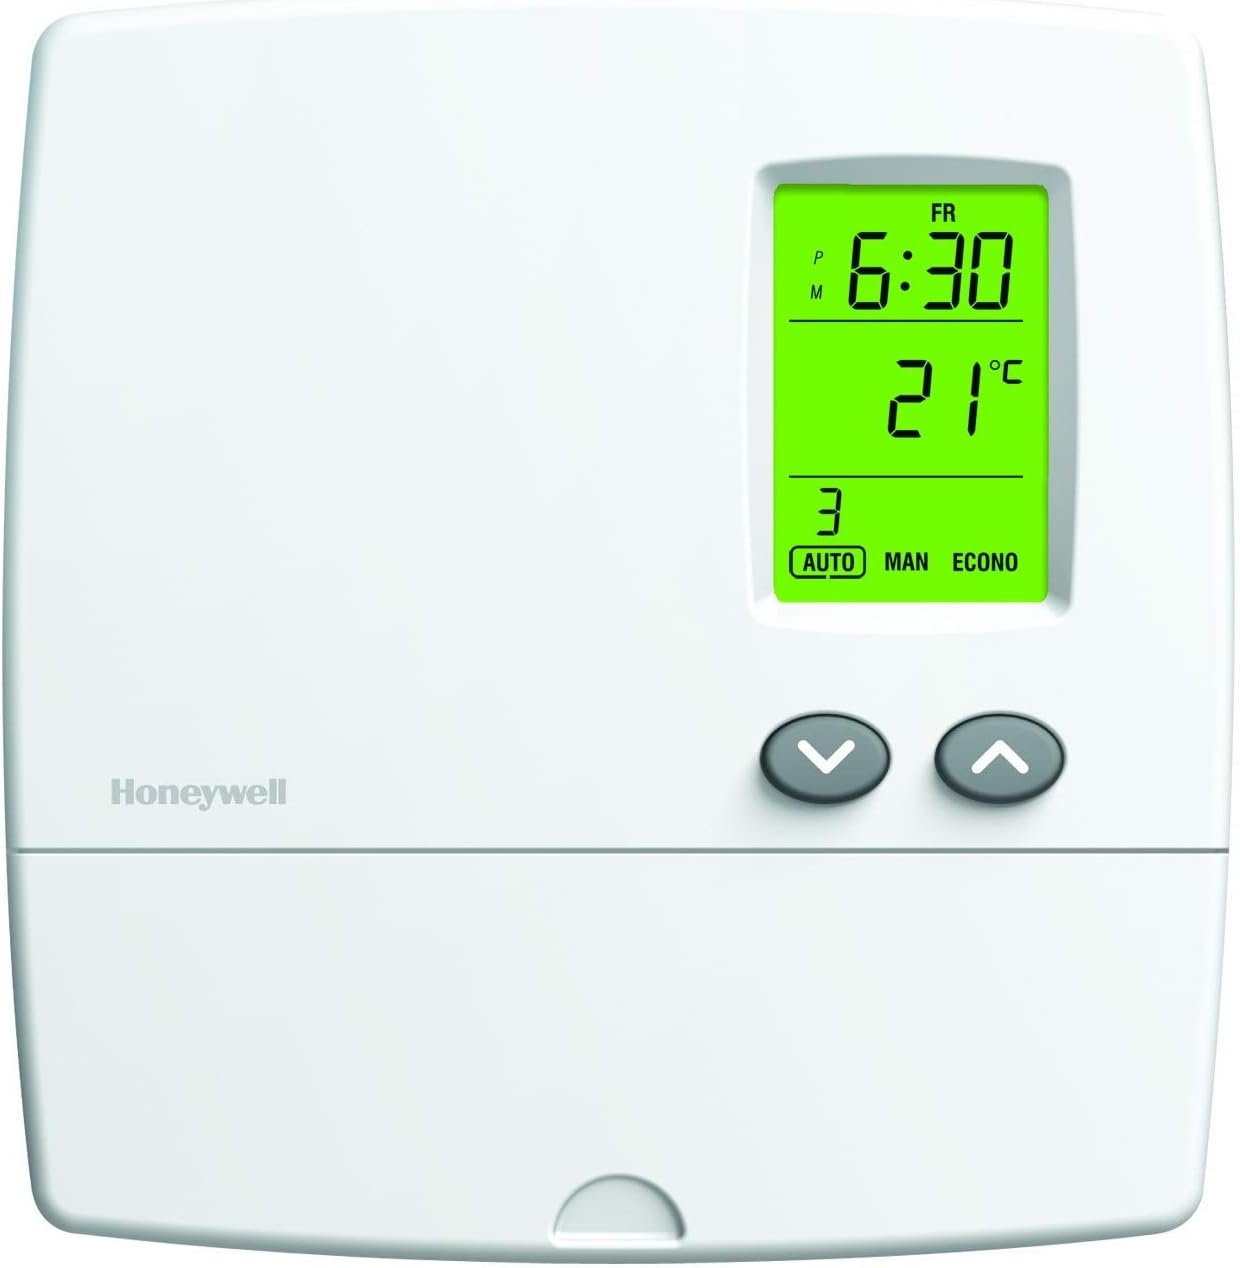 Honeywell YRLV4300A1014/E2 Programmable Electric Baseboard Heater Thermostat/Reads out in Celsius, Convertible to Fahrenheit with Menu